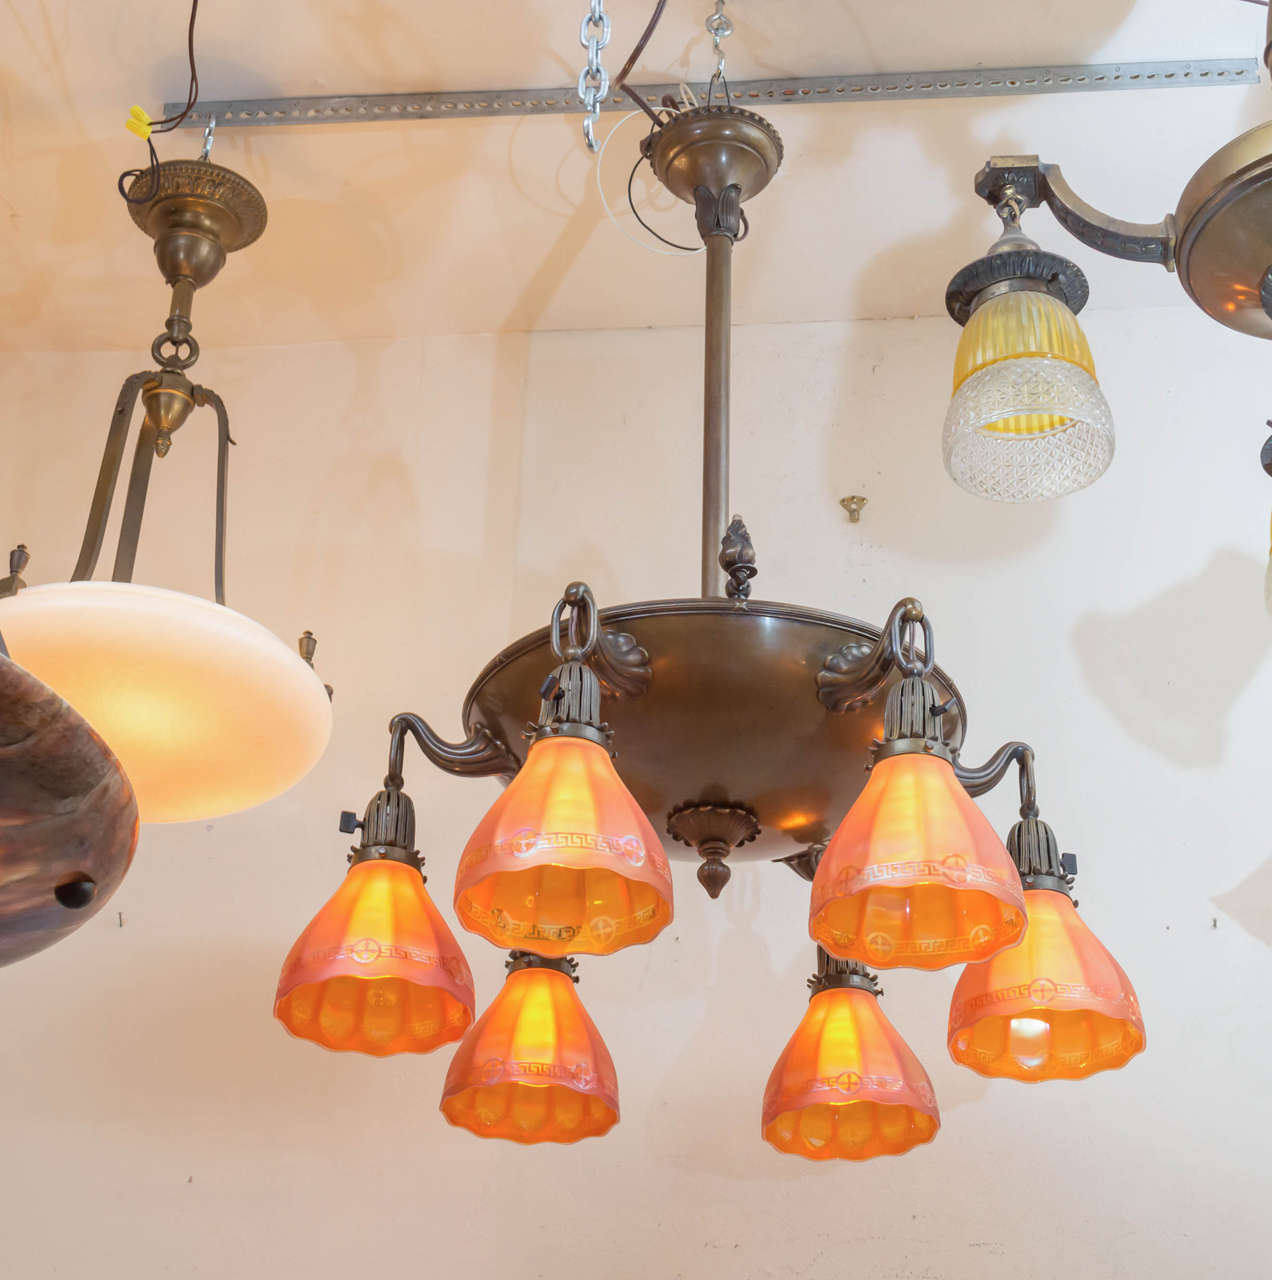 We have been antique lighting dealers for over 40 years, and we will give you an interesting look into our business. We collect period, and only period sets of glass shades. Many of our chandeliers come to us missing glass. Any serious lighting